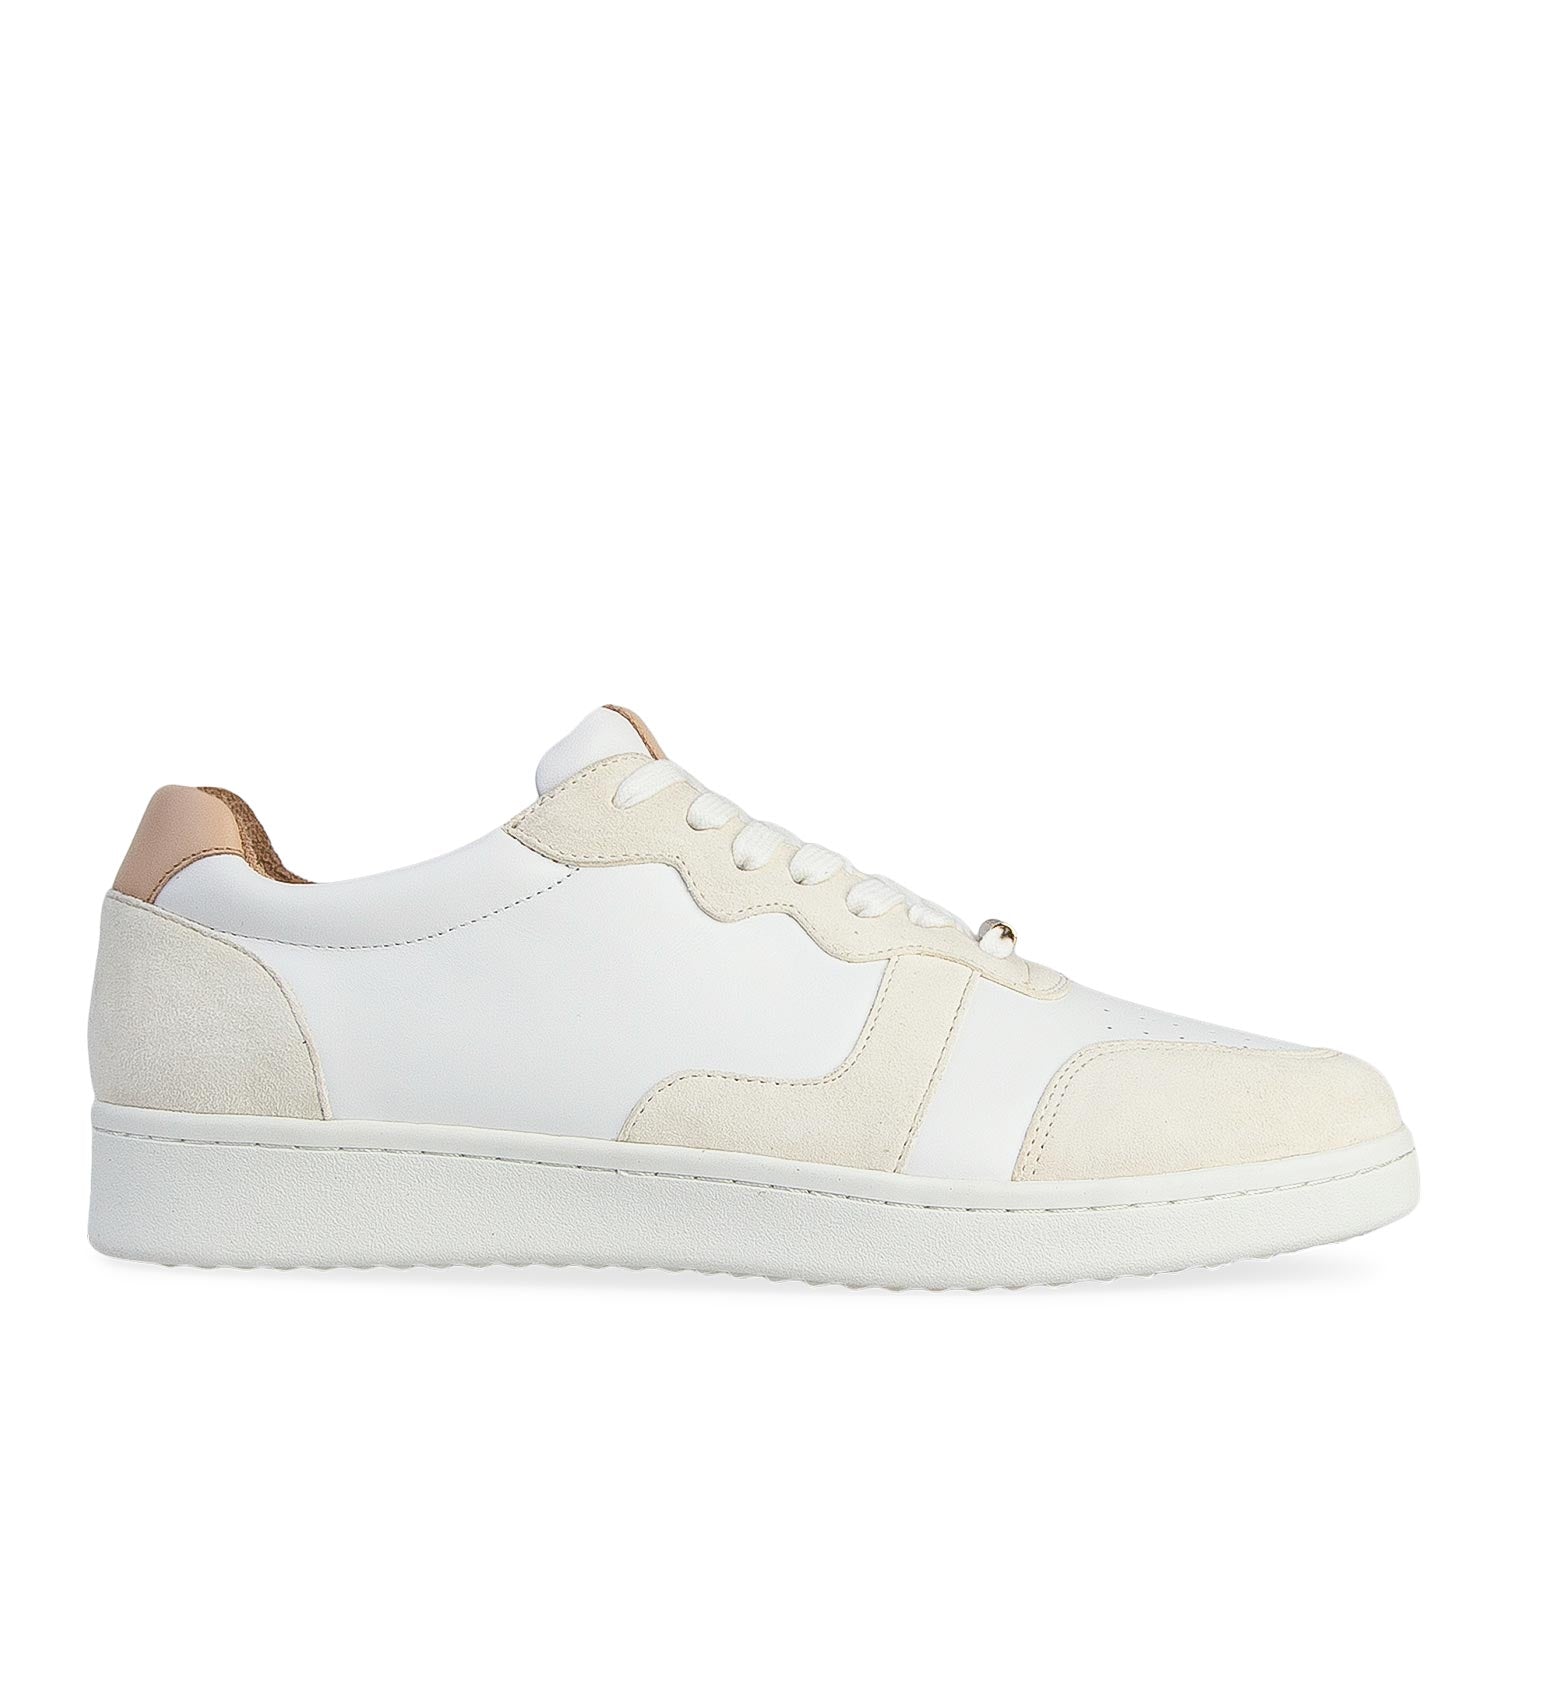 Gadwall White & Blush Leather Sneakers | Bared Footwear